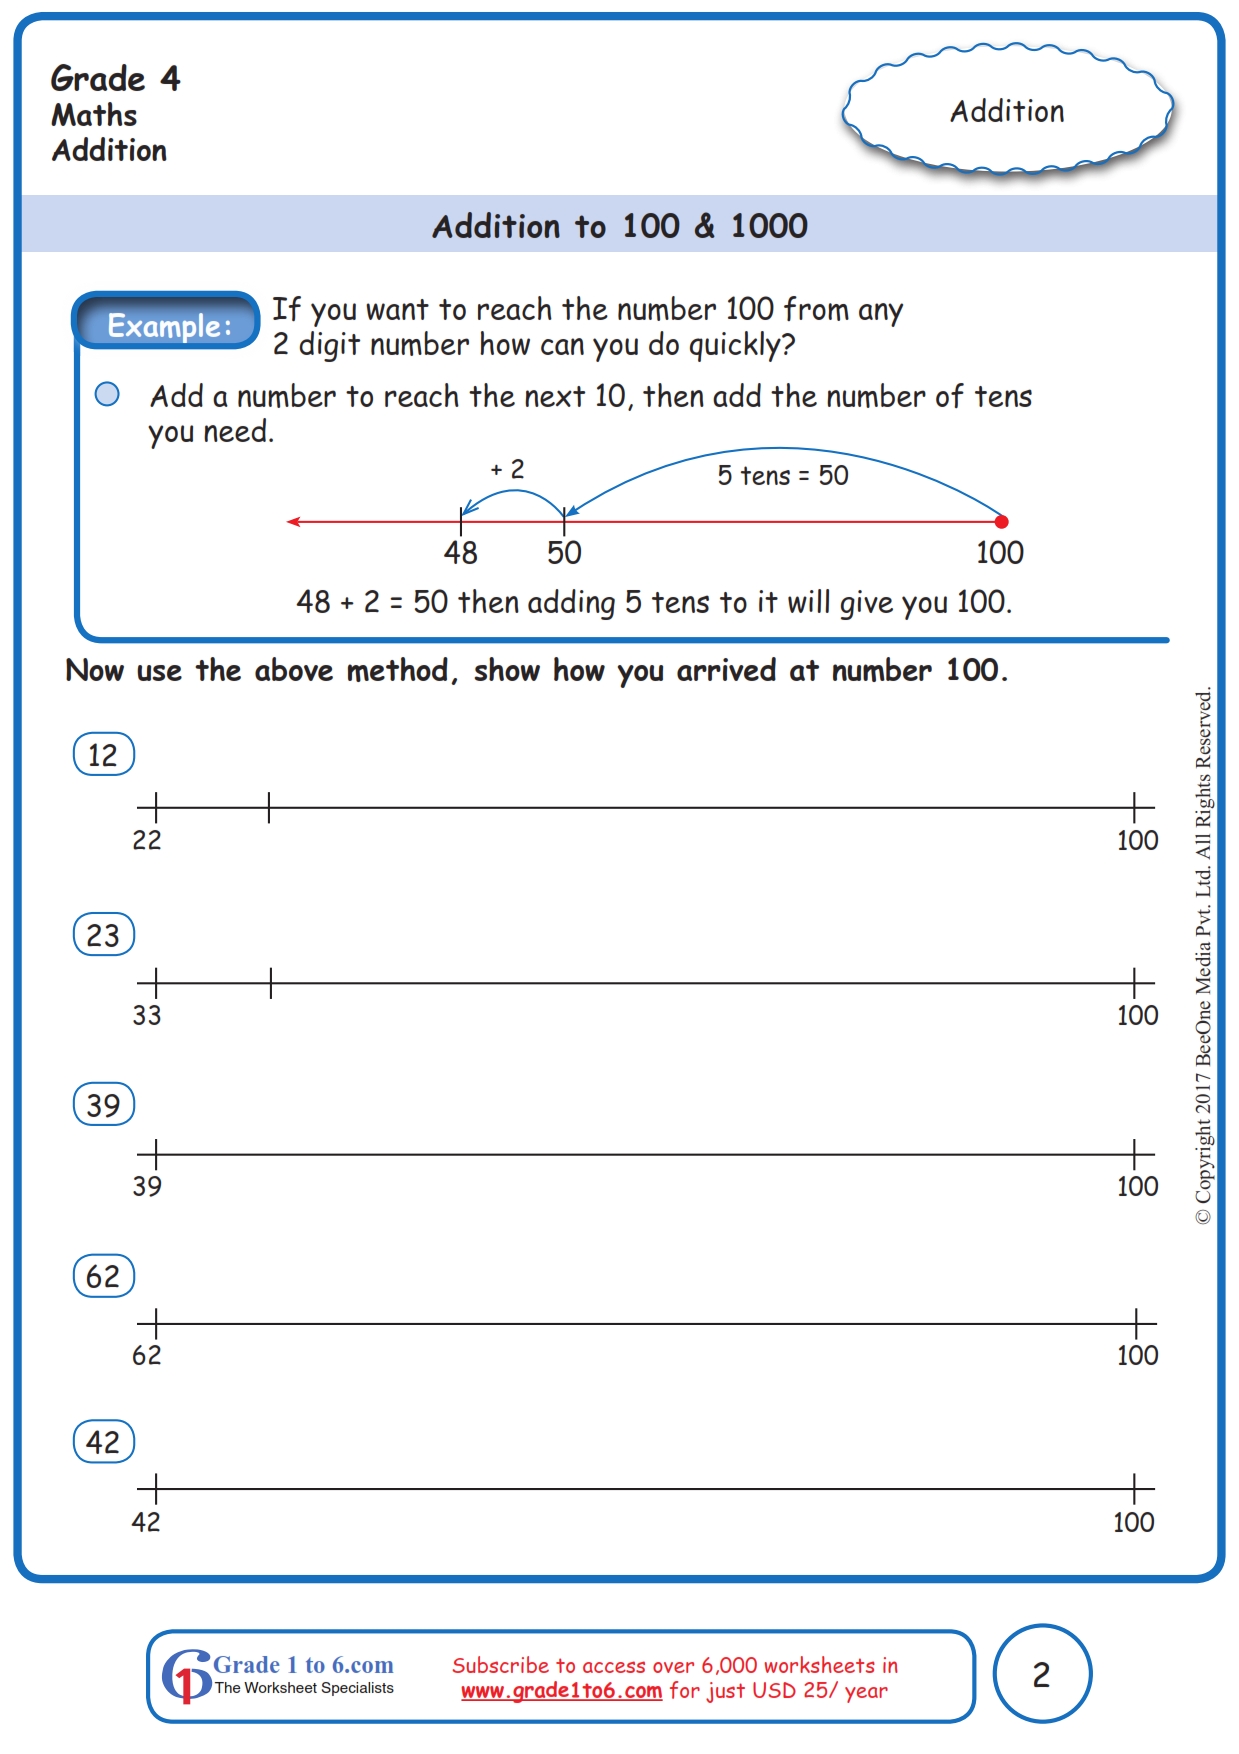 grade-4-addition-strategies-worksheets-www-grade1to6